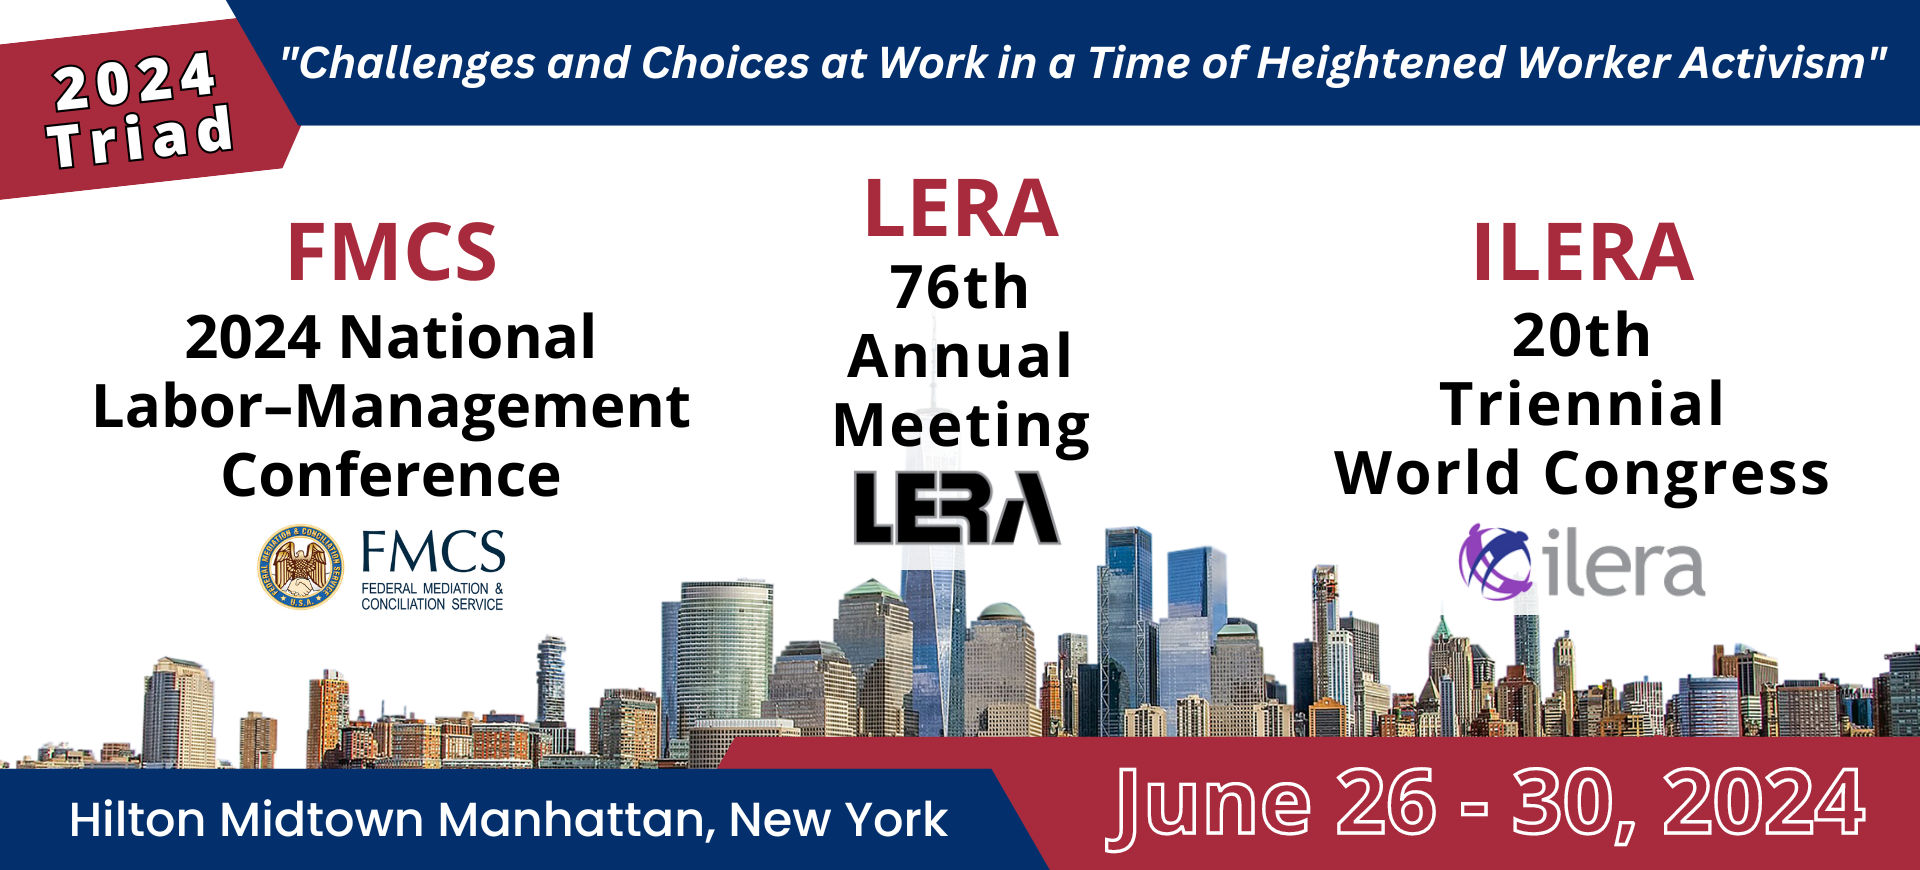 CELSI team is part of 20the ILERA World Conference in New York